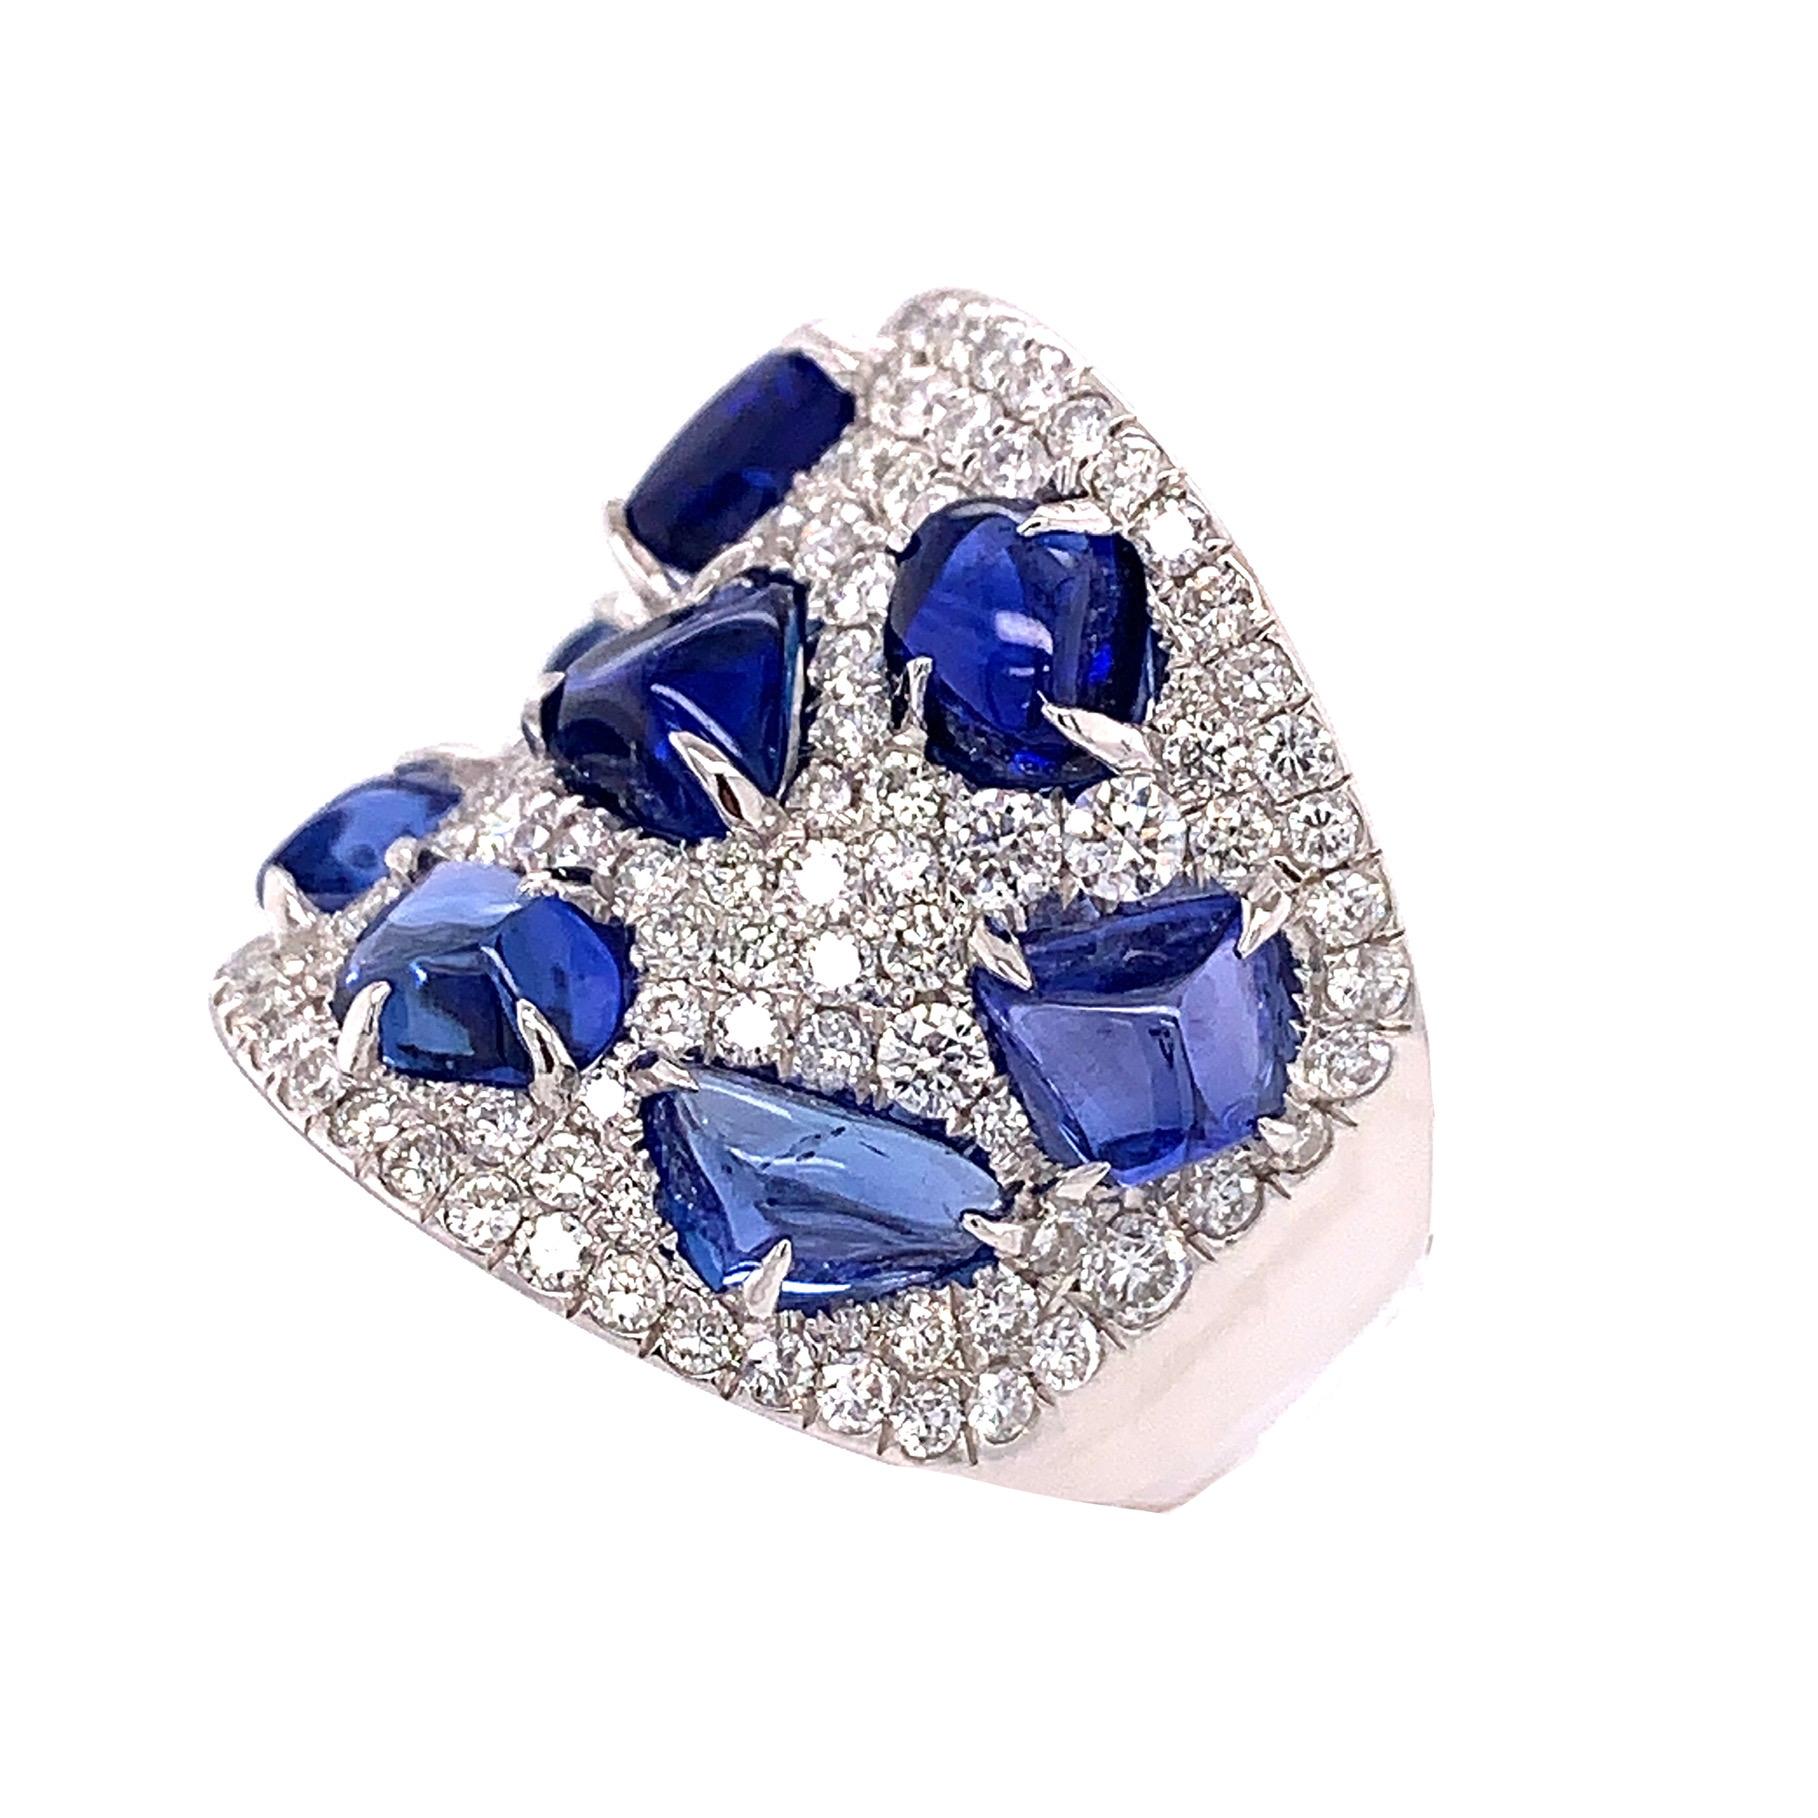 Contemporary Ruchi New York Blue Sapphire and Diamond Cocktail Ring